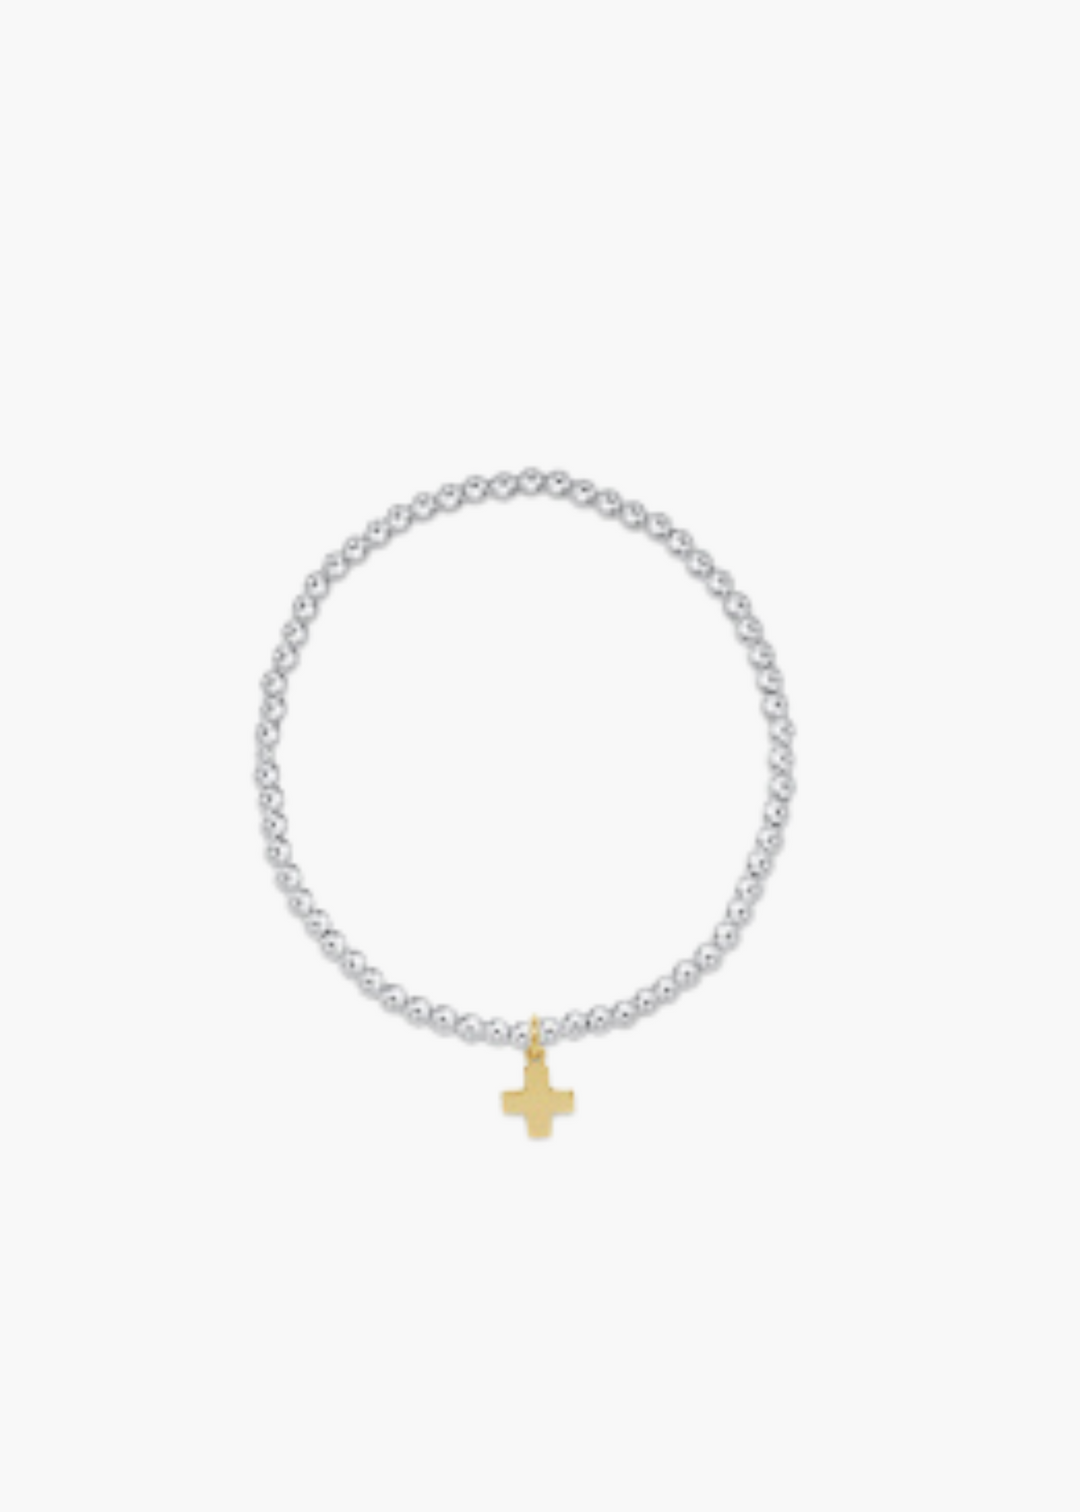 Classic Sterling Mixed Metal 3mm Bead Bracelet - Signature Cross Gold Charm